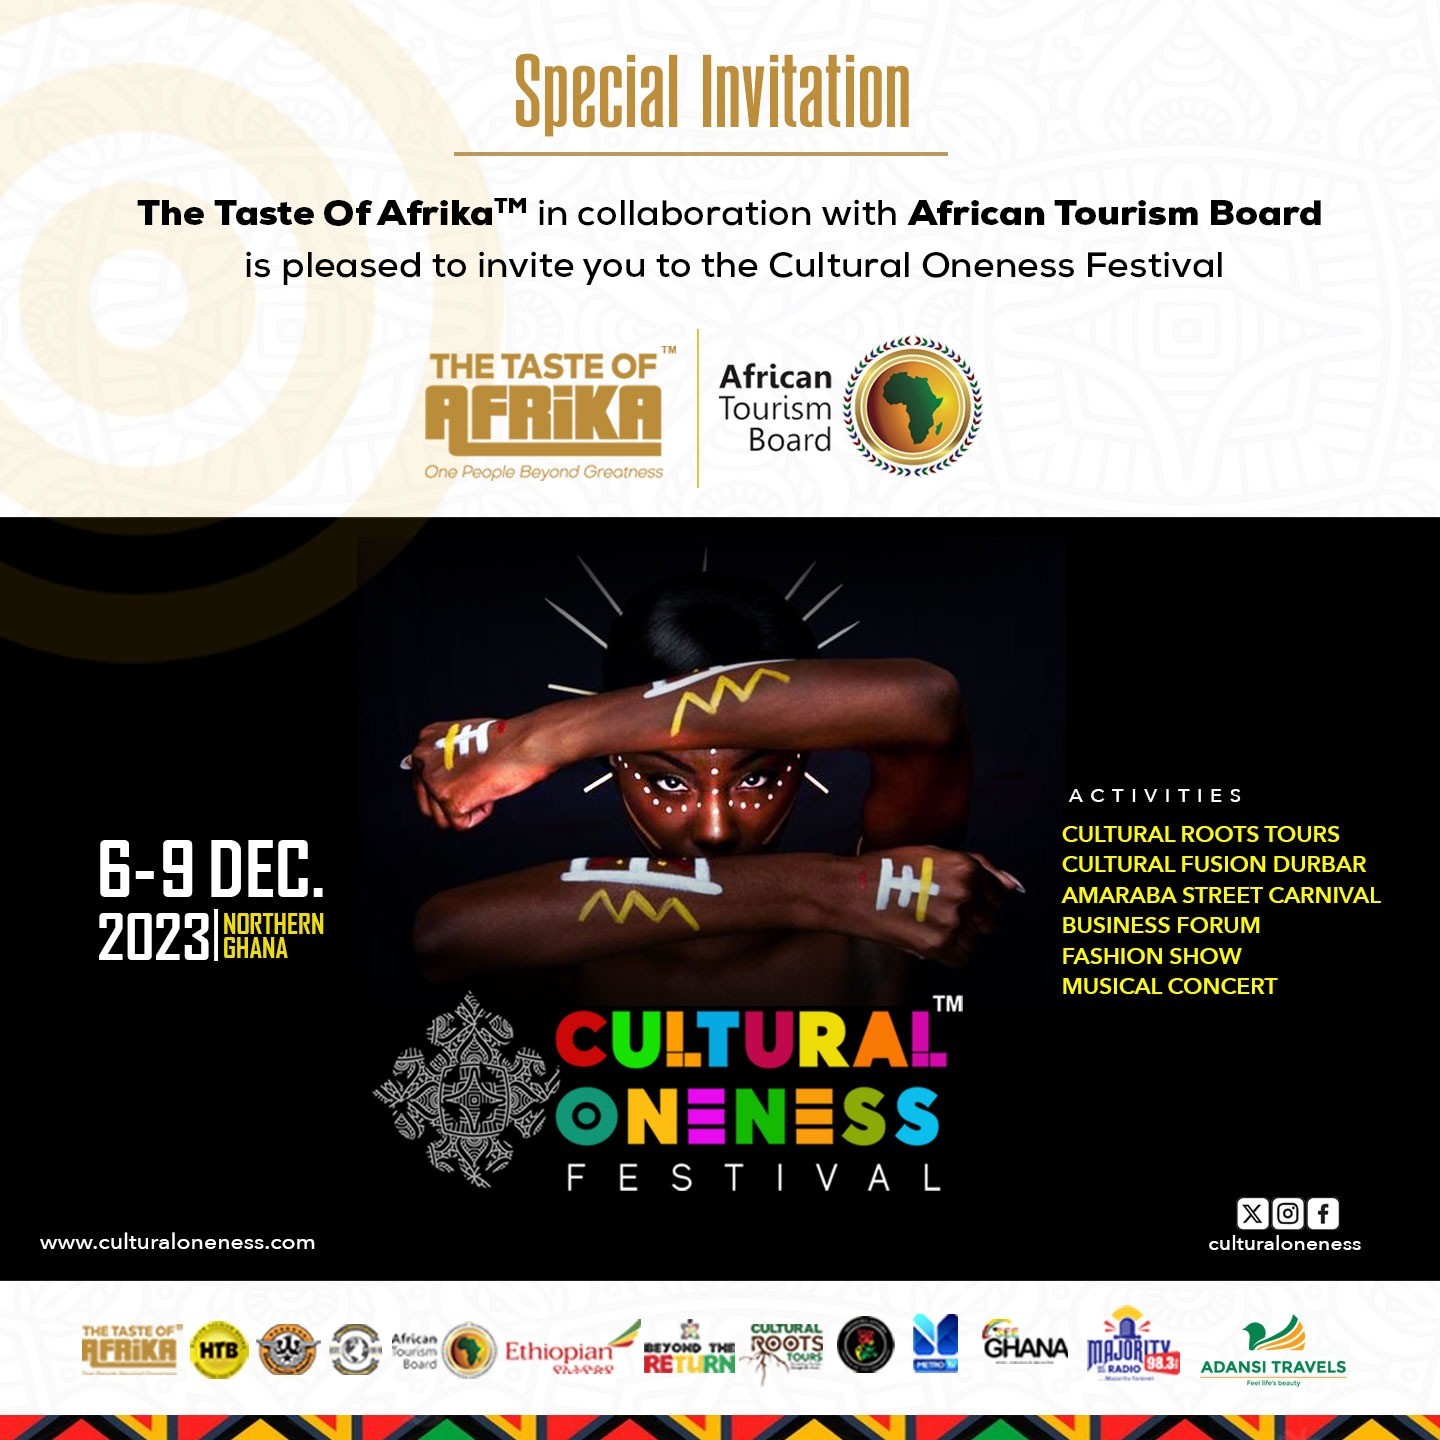 African Tourism Board Joins Cultural Oneness Festival to Celebrate African Unity